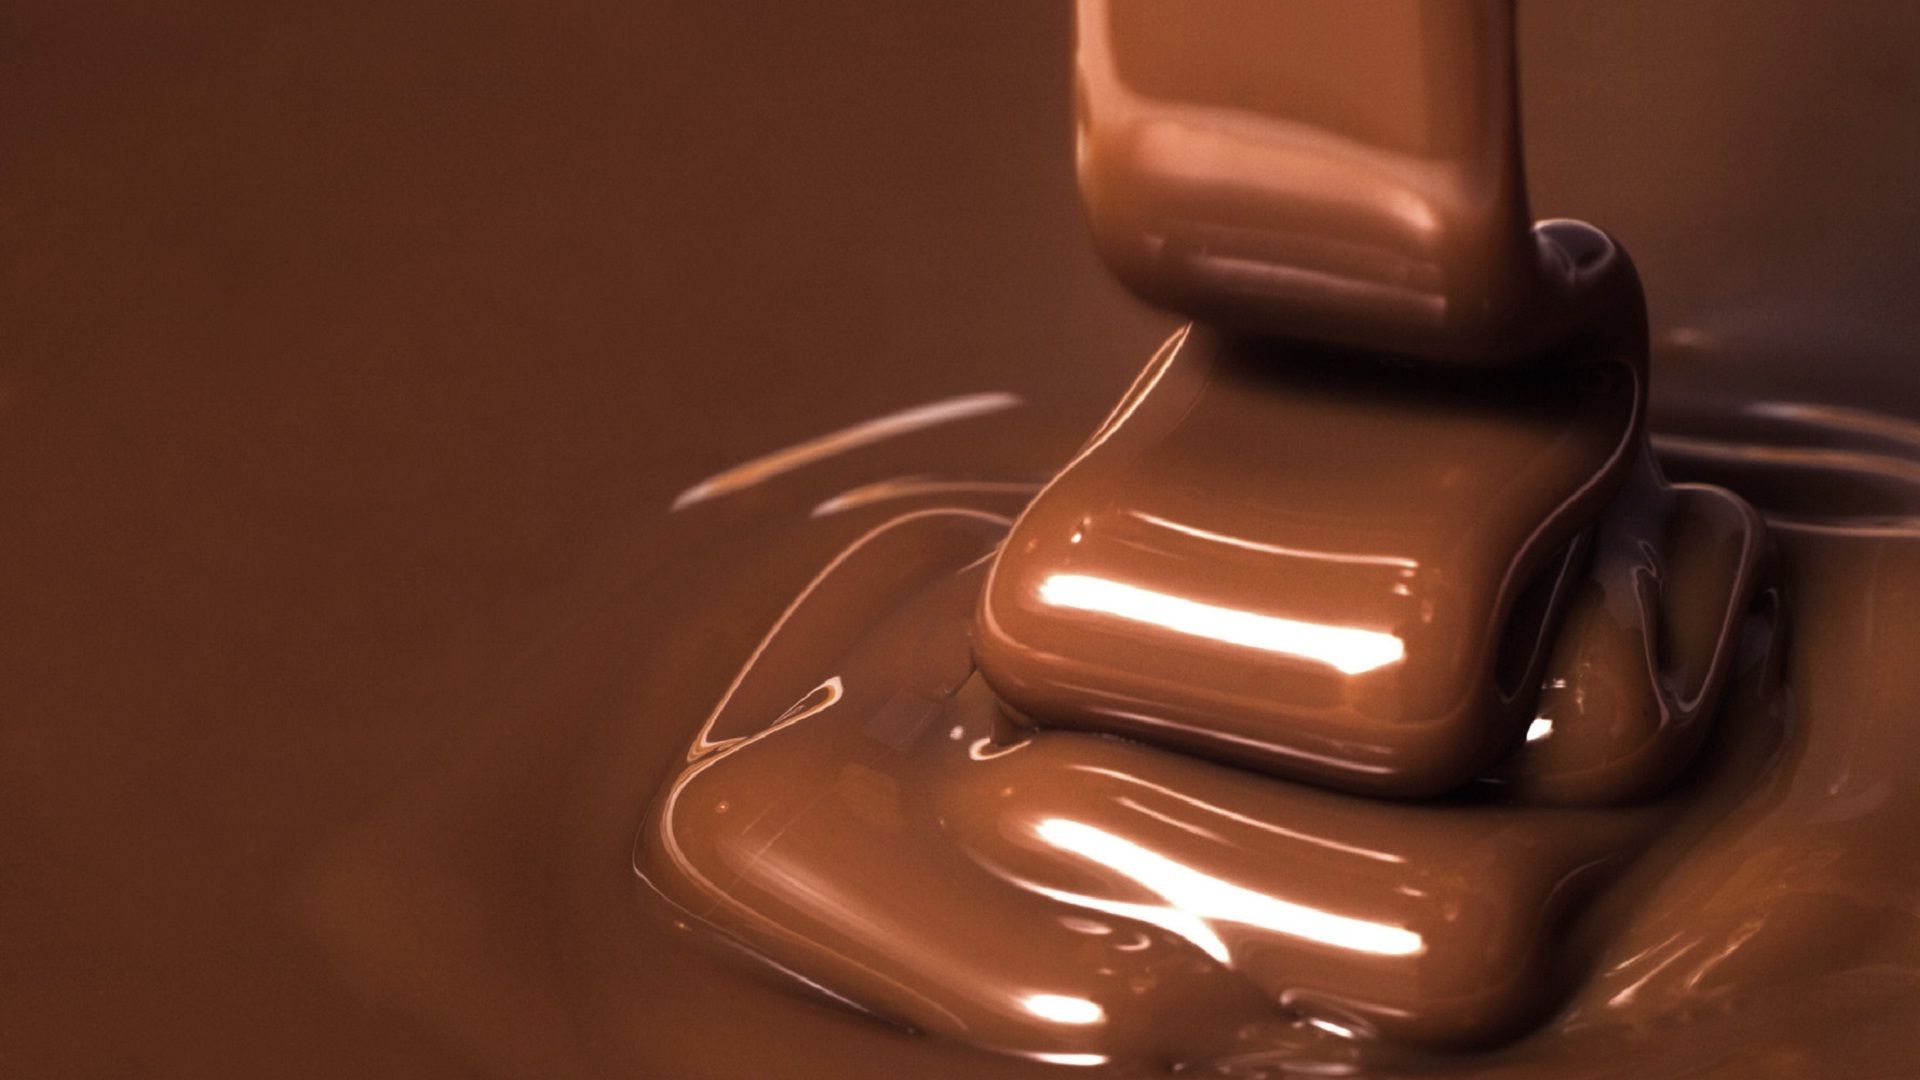 Chocolate: Used to flavor or coat various confections and bakery products. 1920x1080 Full HD Wallpaper.